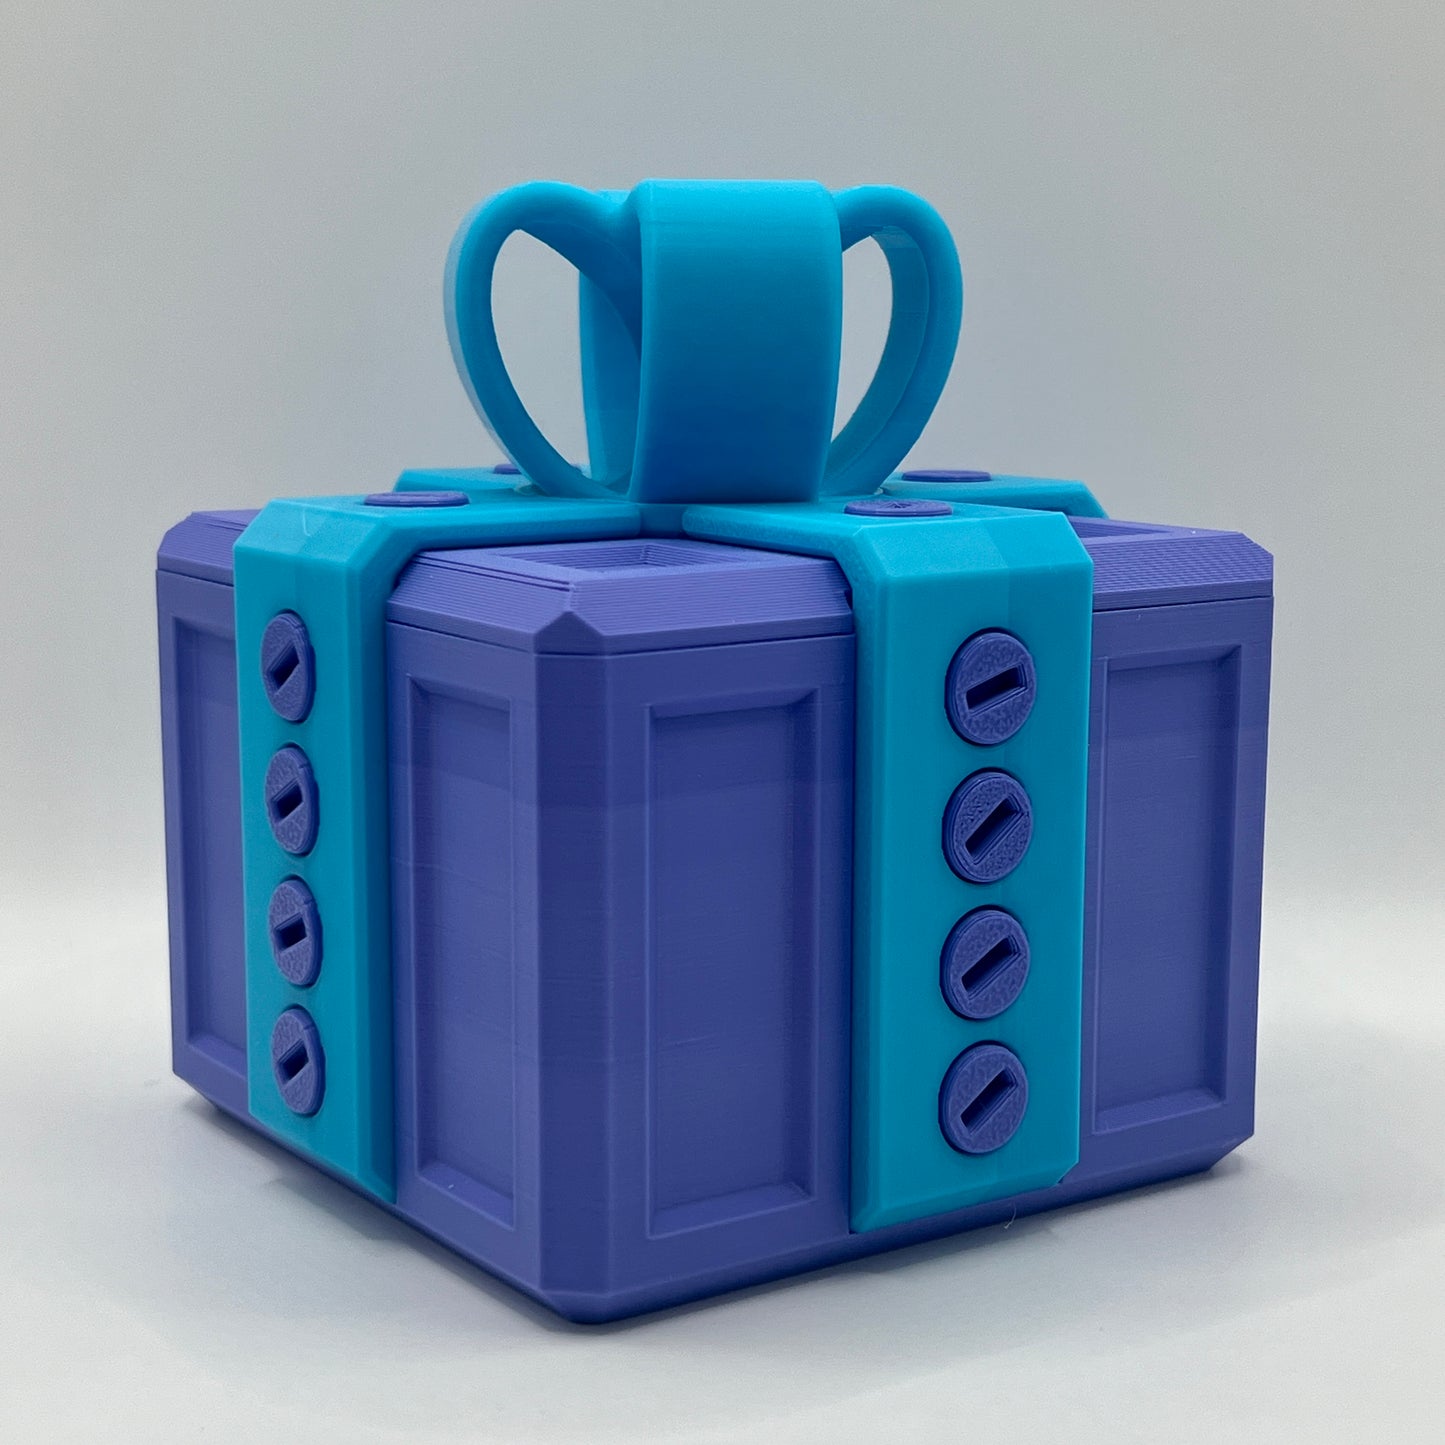 The Annoying Gift Box with 20 Bolts and a hidden key!